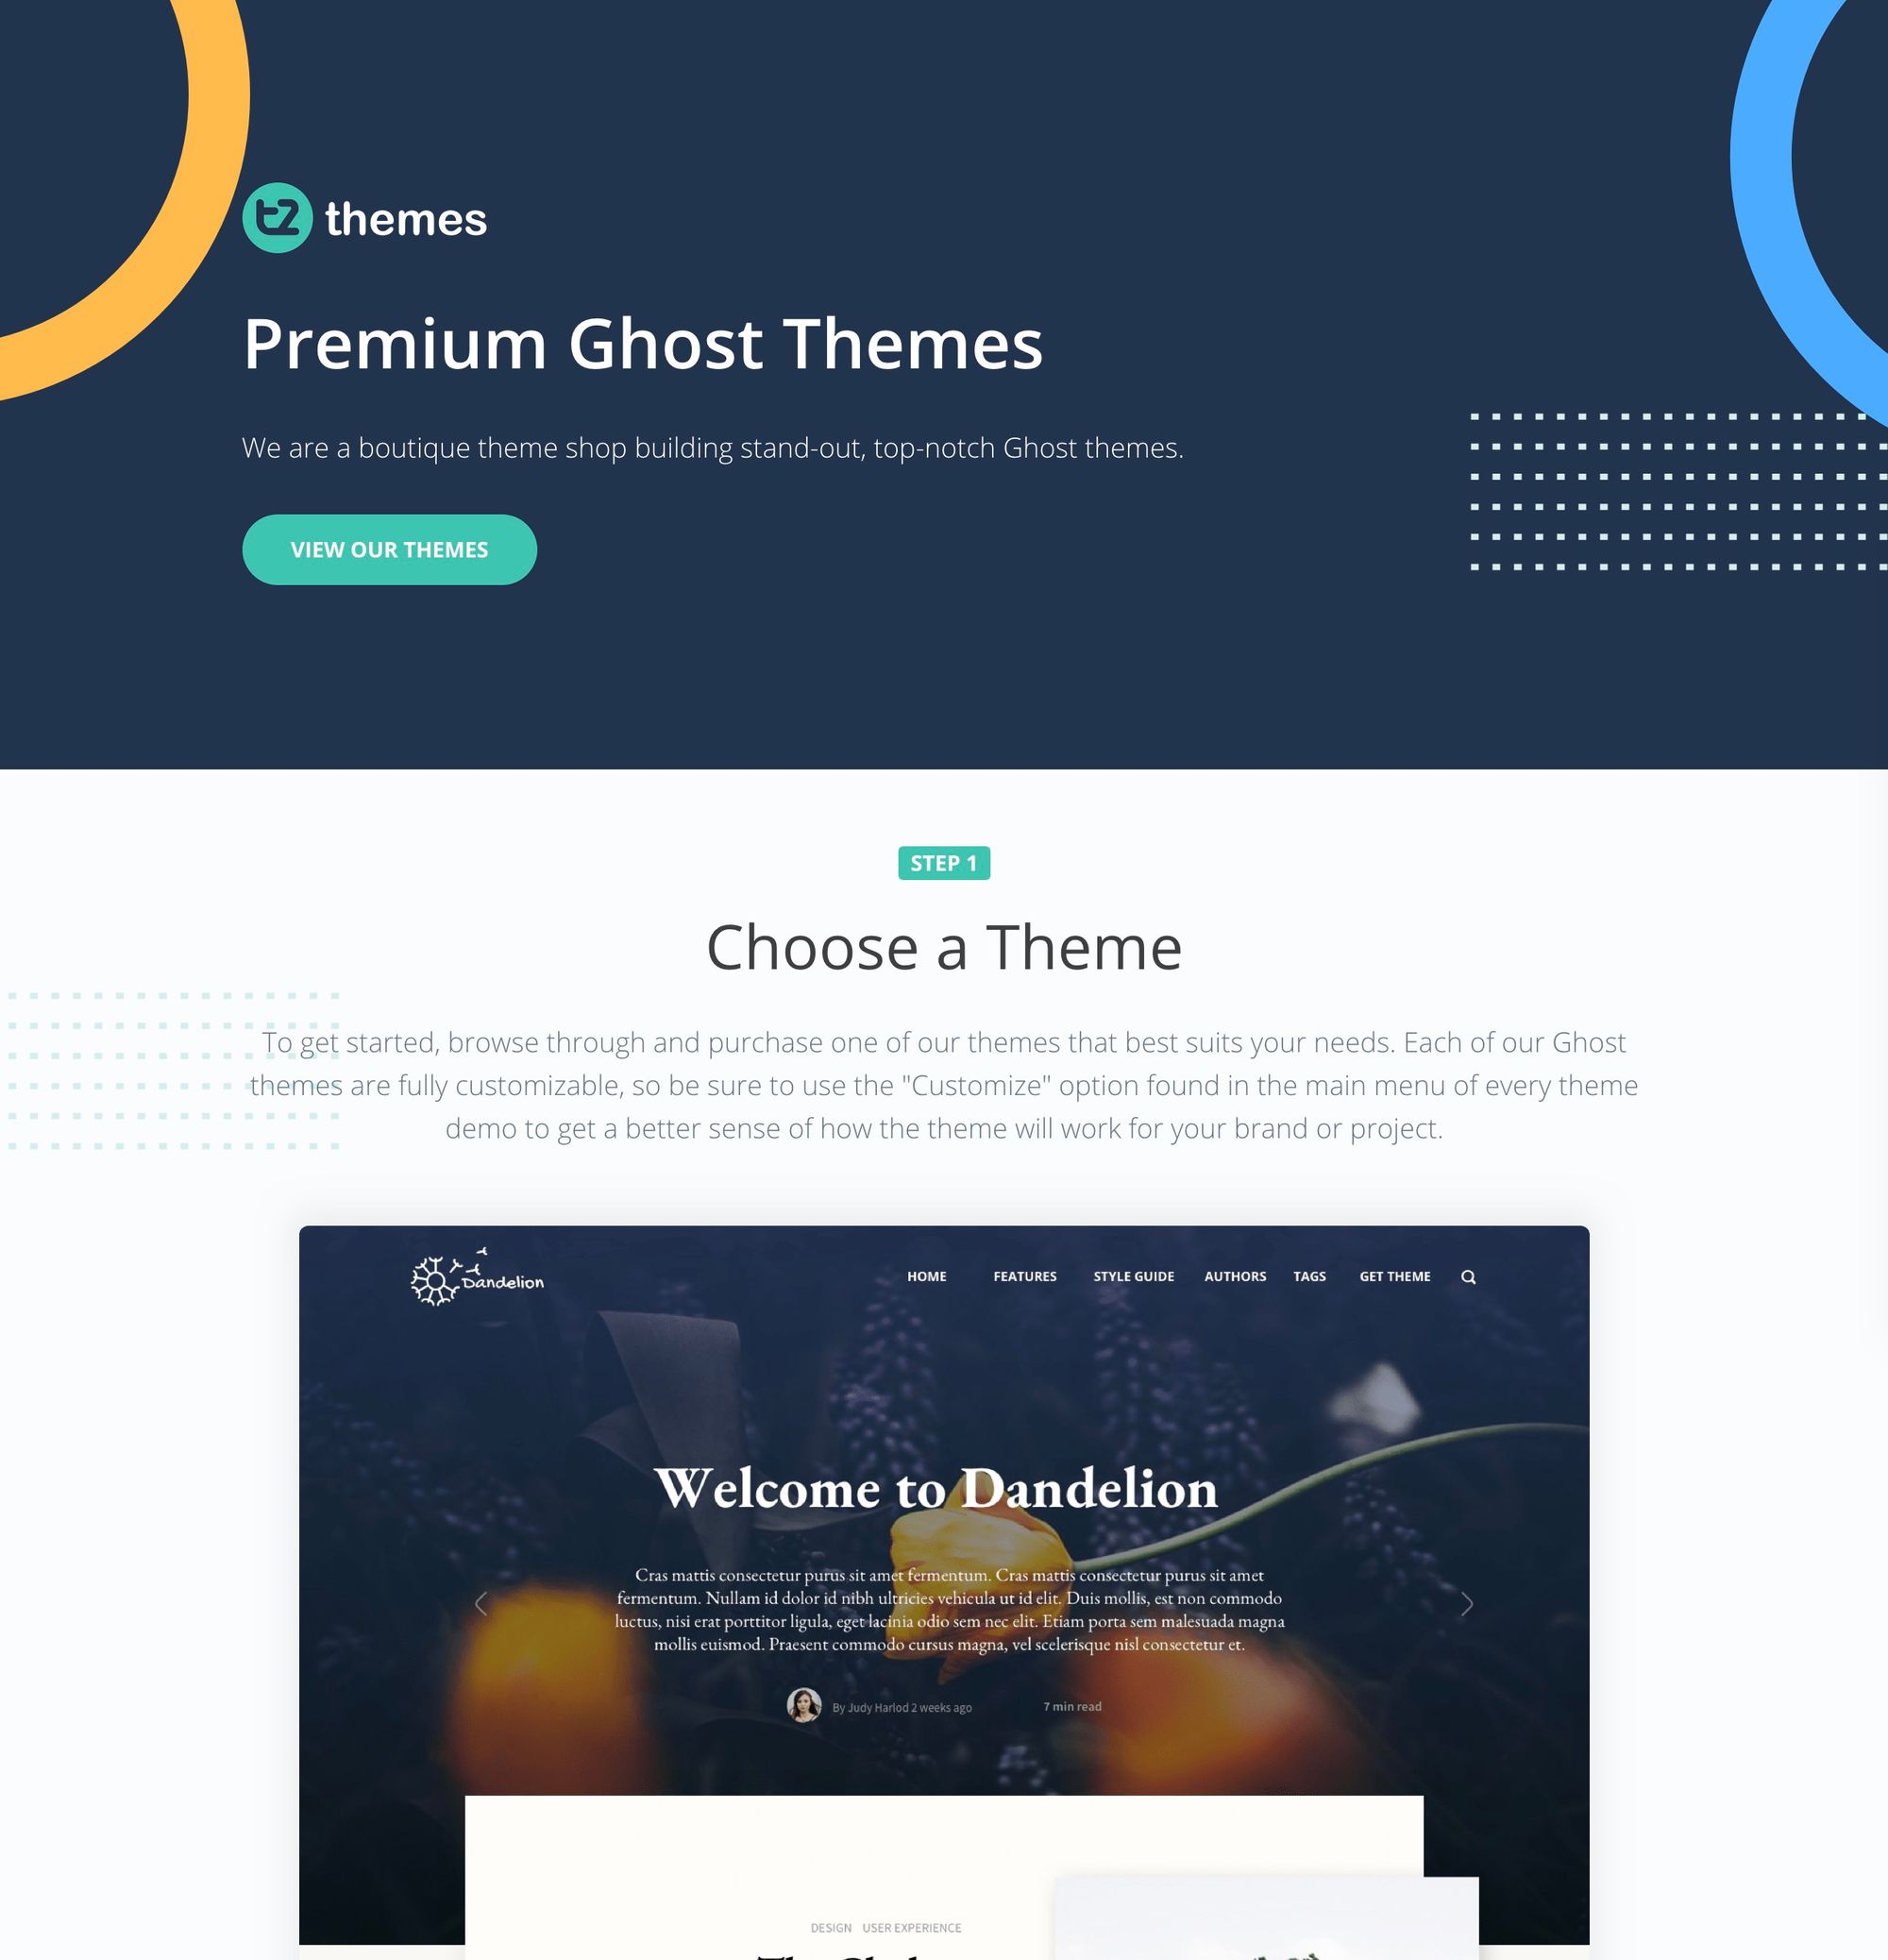 The best places to find Ghost Themes in 2020